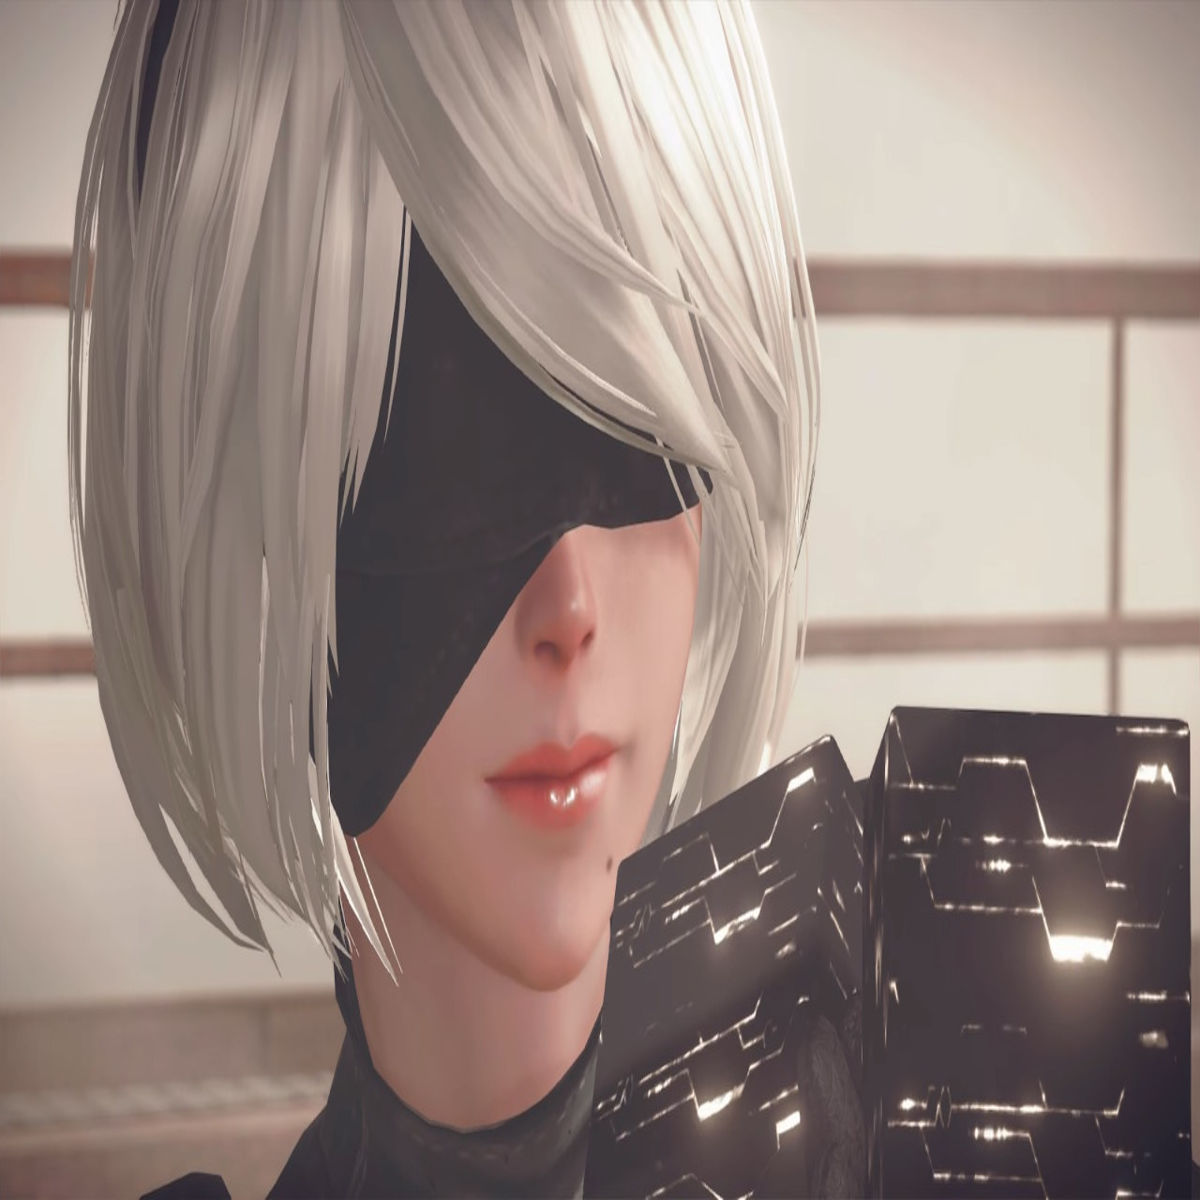 Nintendo Switch references” found in 'NieR Replicant' datamine